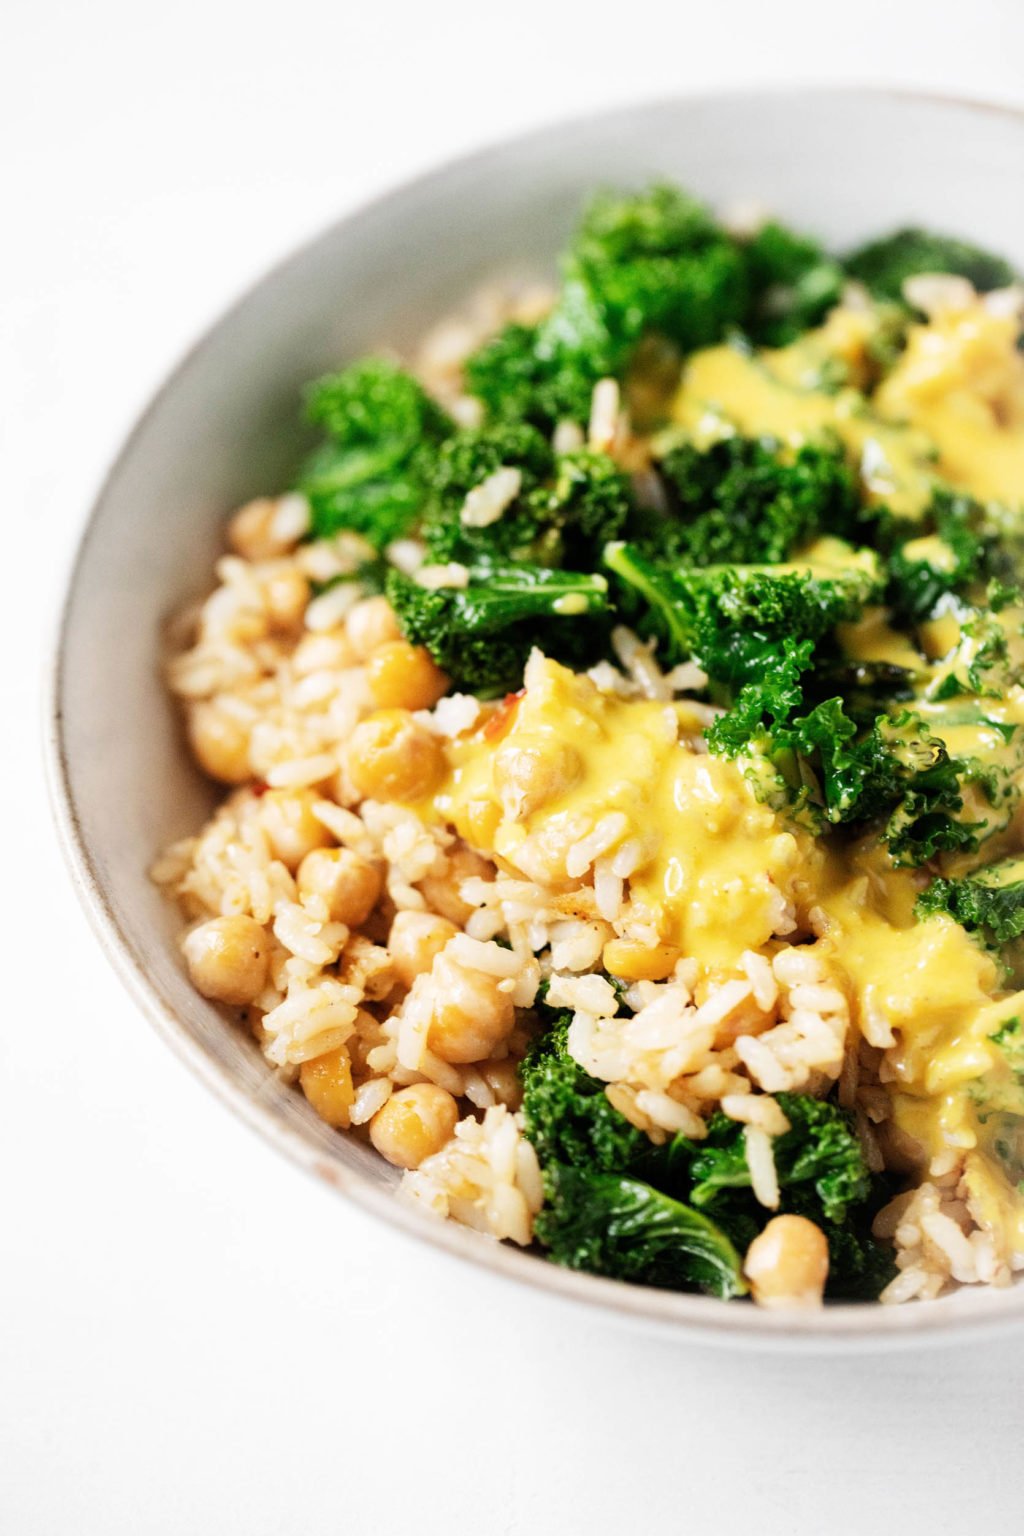 A serving bowl holds colorful plant-based ingredients, dressed in a golden, creamy sauce.